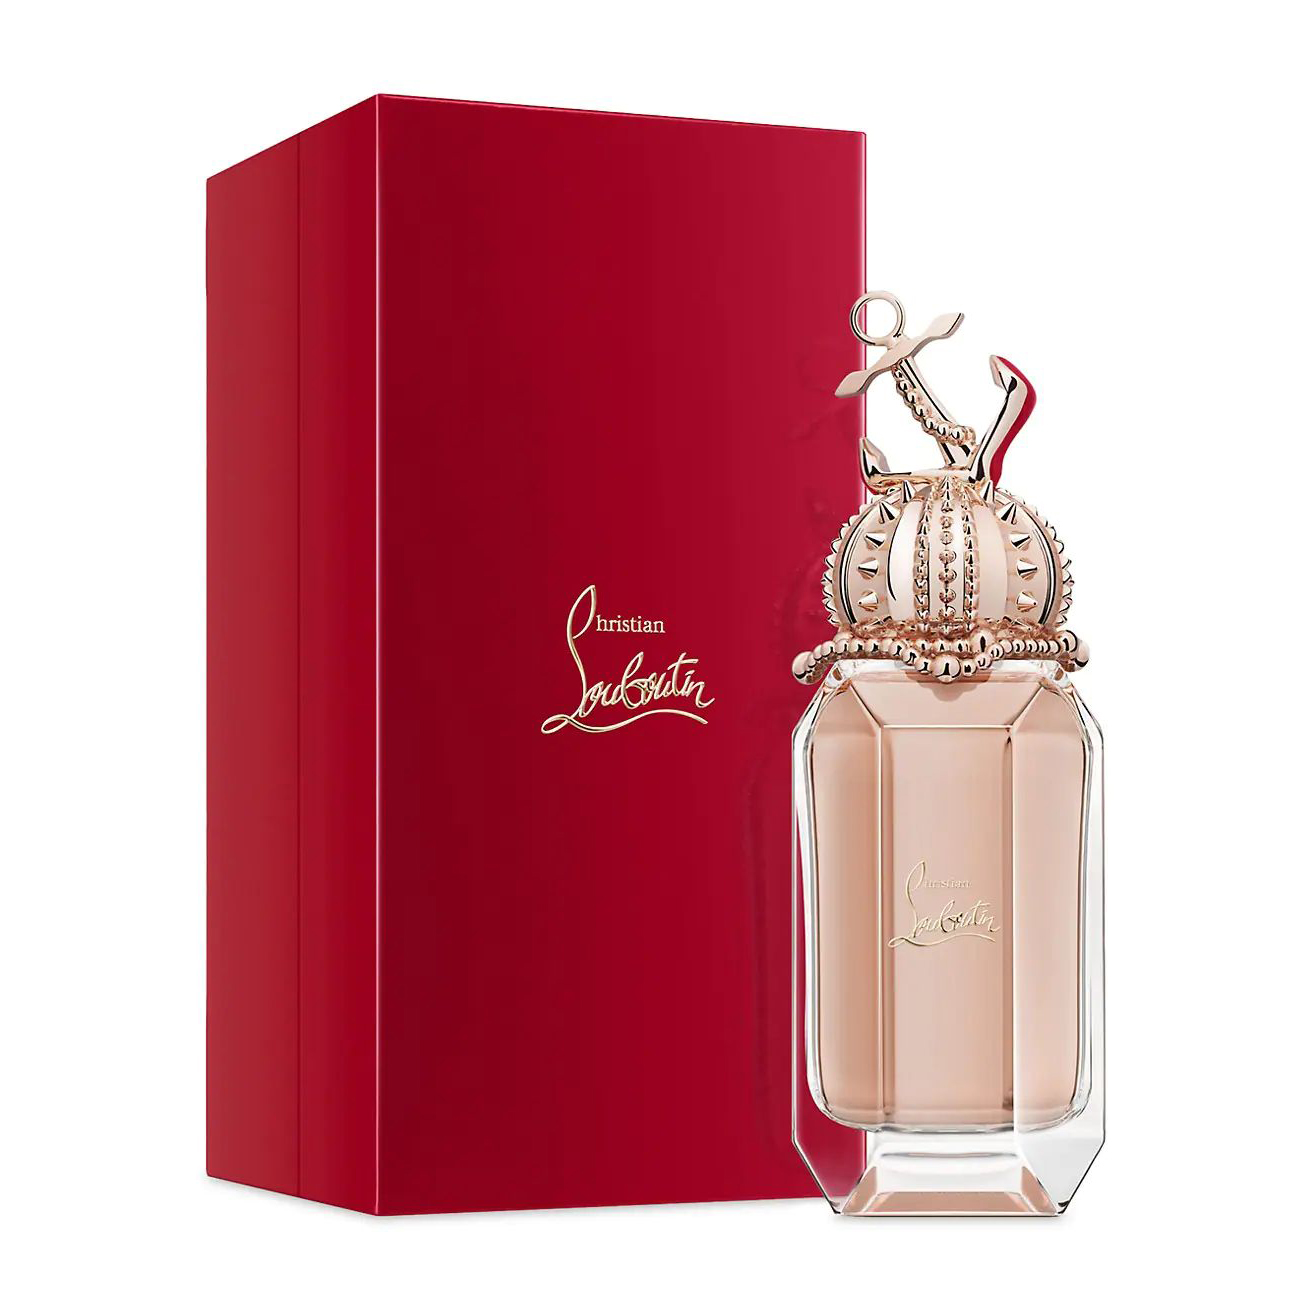 Christian Louboutin walks us through Loubiworld, his new collection of  insatiable perfumes